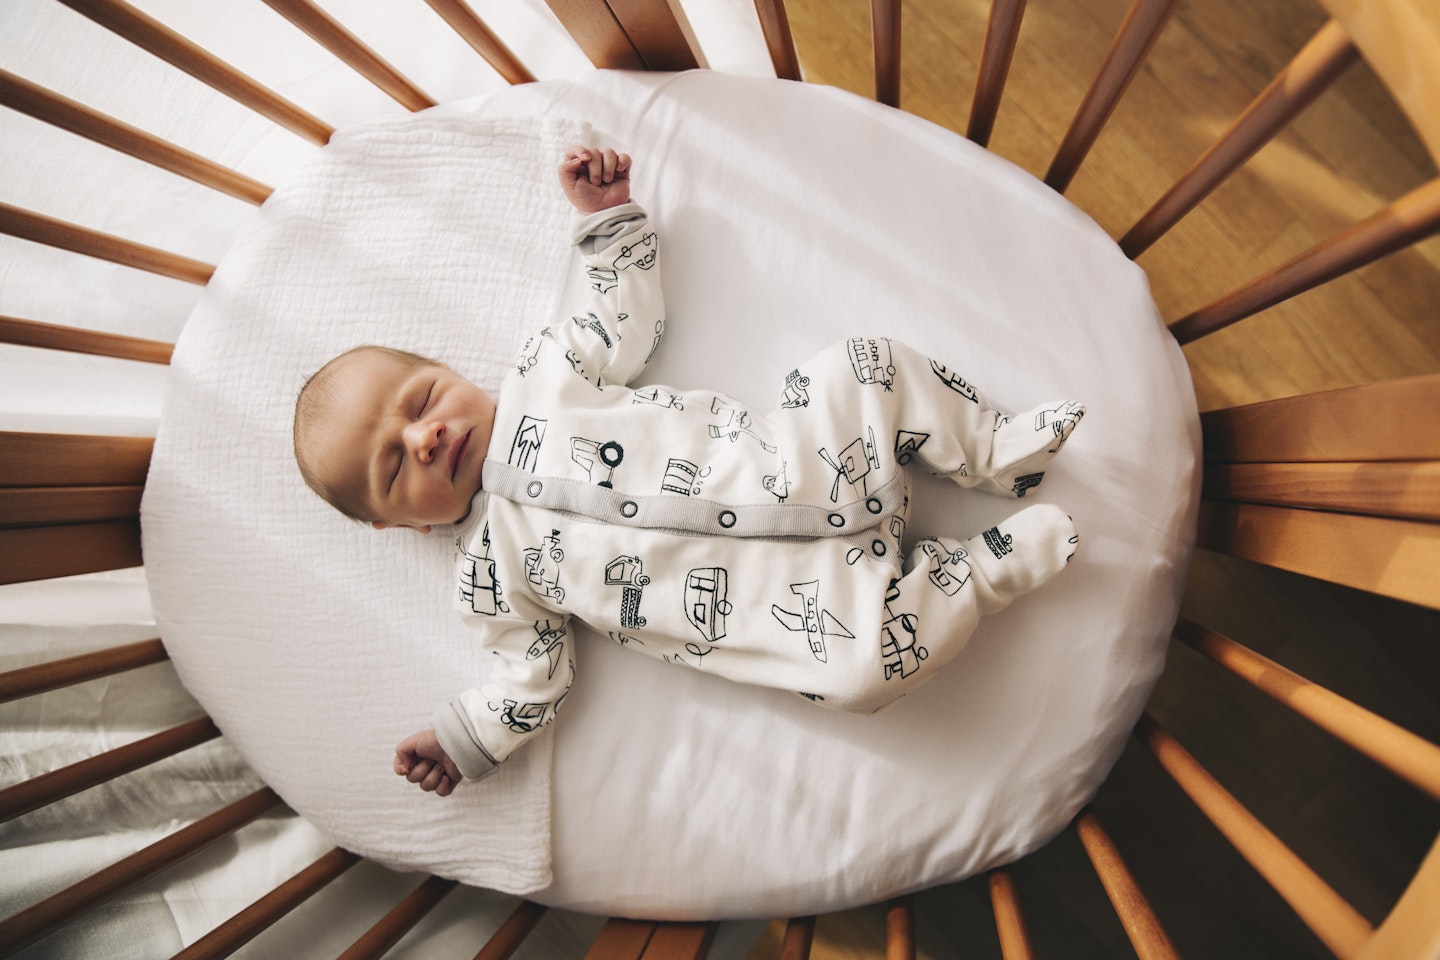 Best to buy newborn or 0-3 months clothes for new baby?